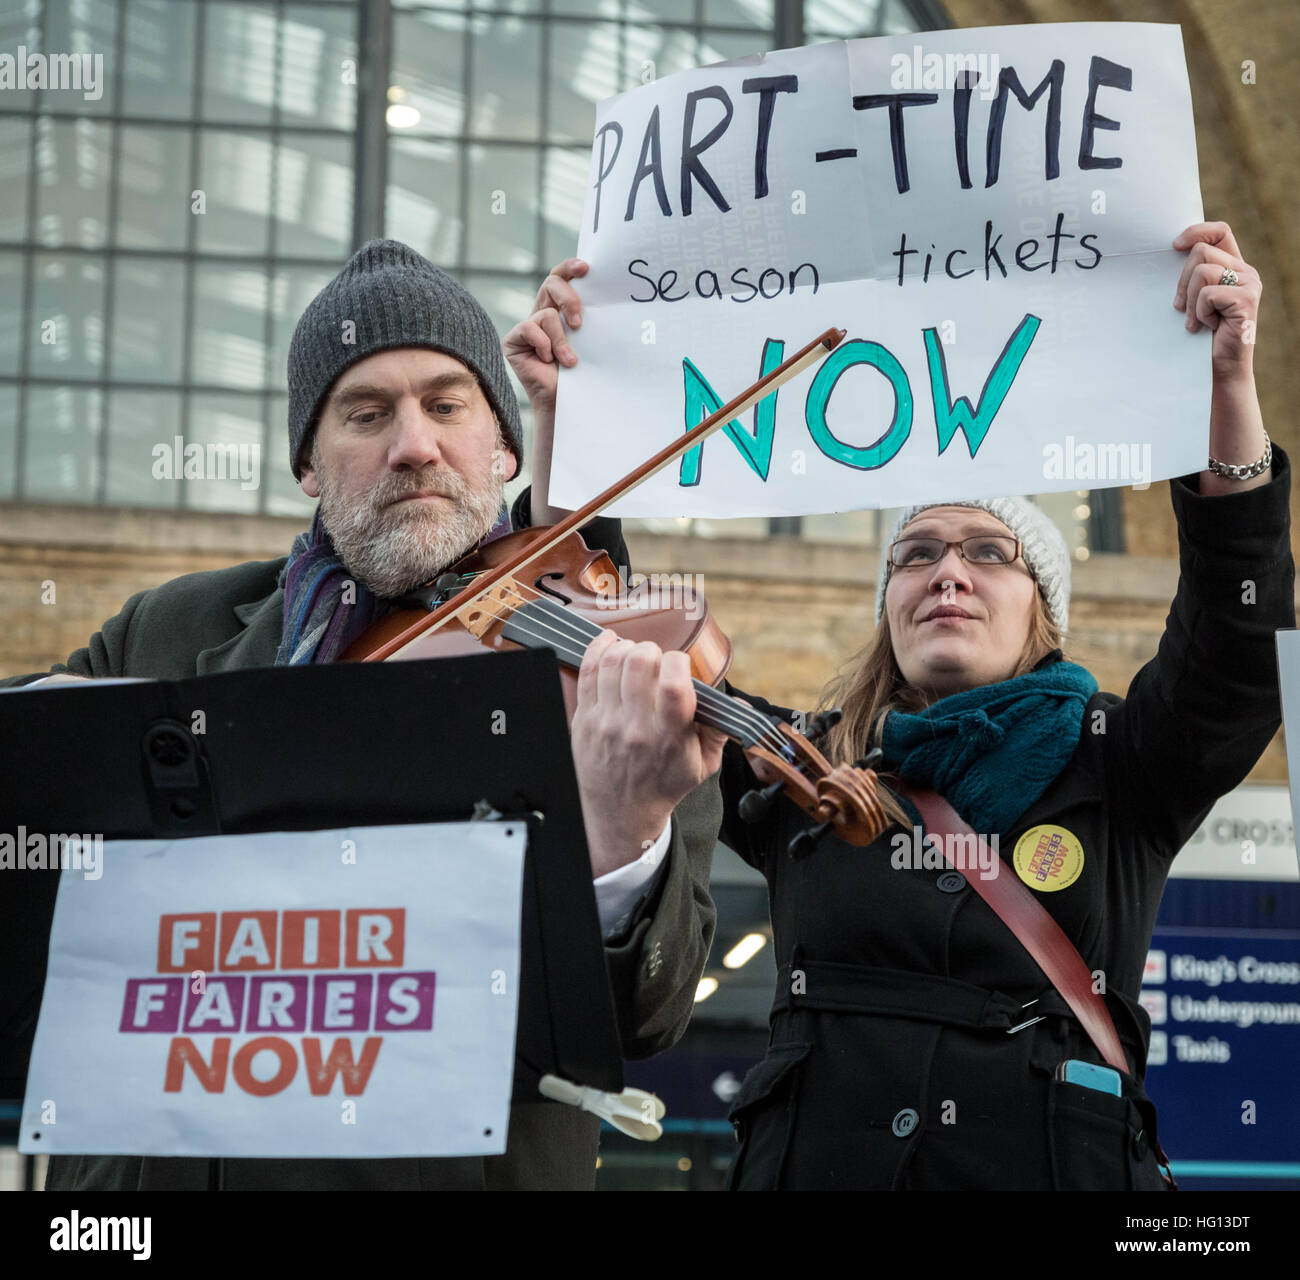 London, UK. 3rd Jan, 2017. Rail campaigners hold an early morning protest outside King's Cross station against fare increases. Commuters now face an average increase of 2.3% for rail travel in the new year © Guy Corbishley/Alamy Live News Stock Photo